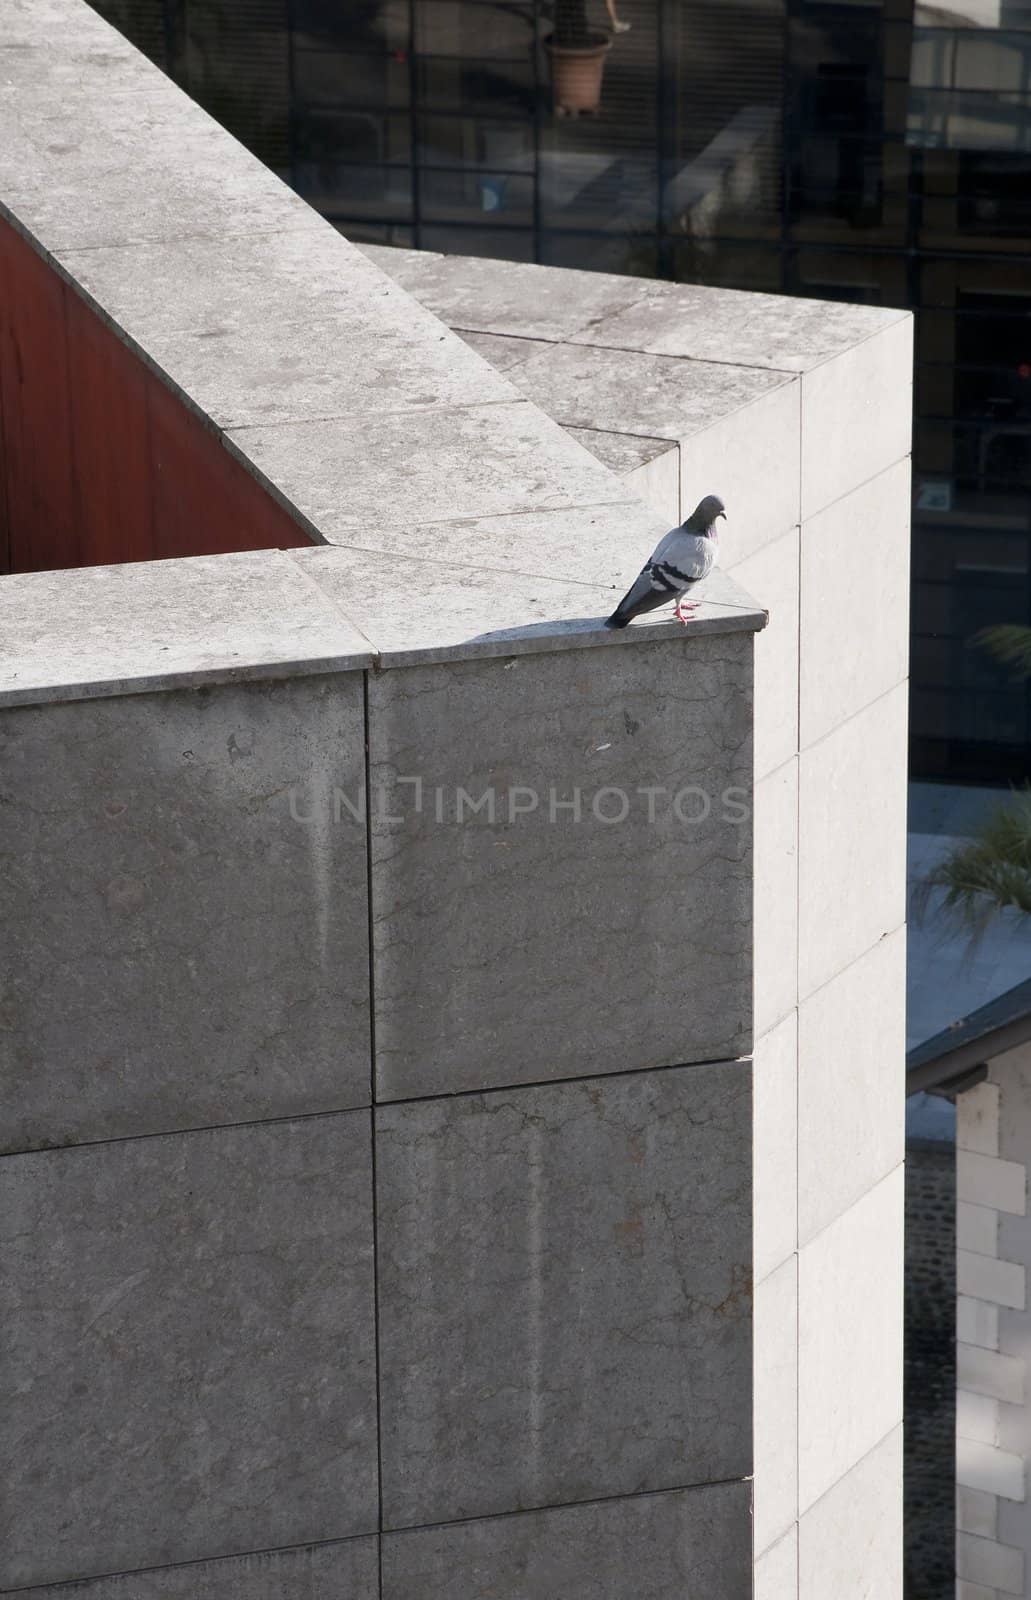 Pigeon alone on a city wall